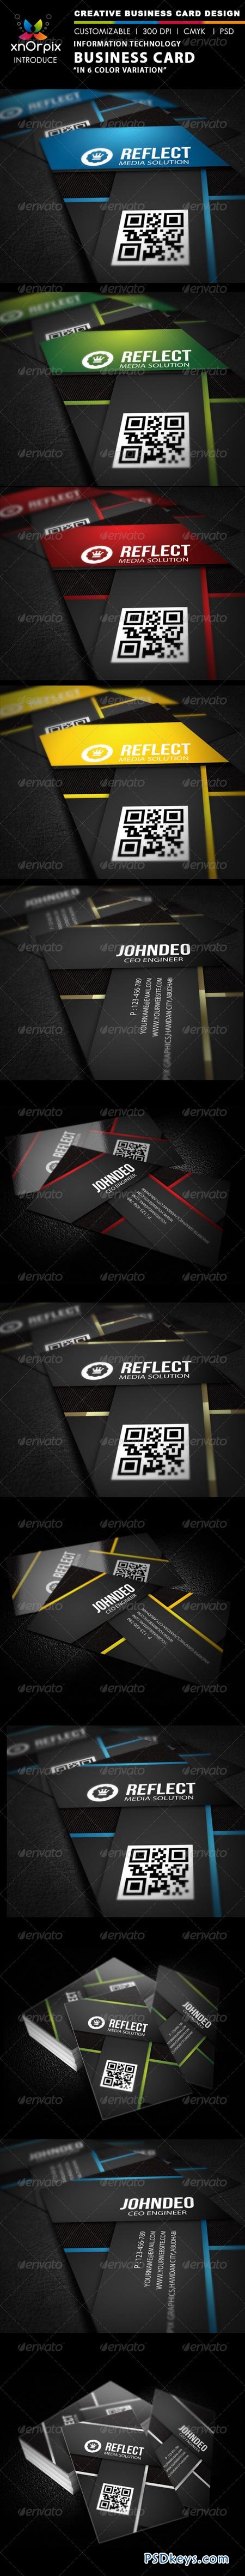 Information Technology Business Card 2090280